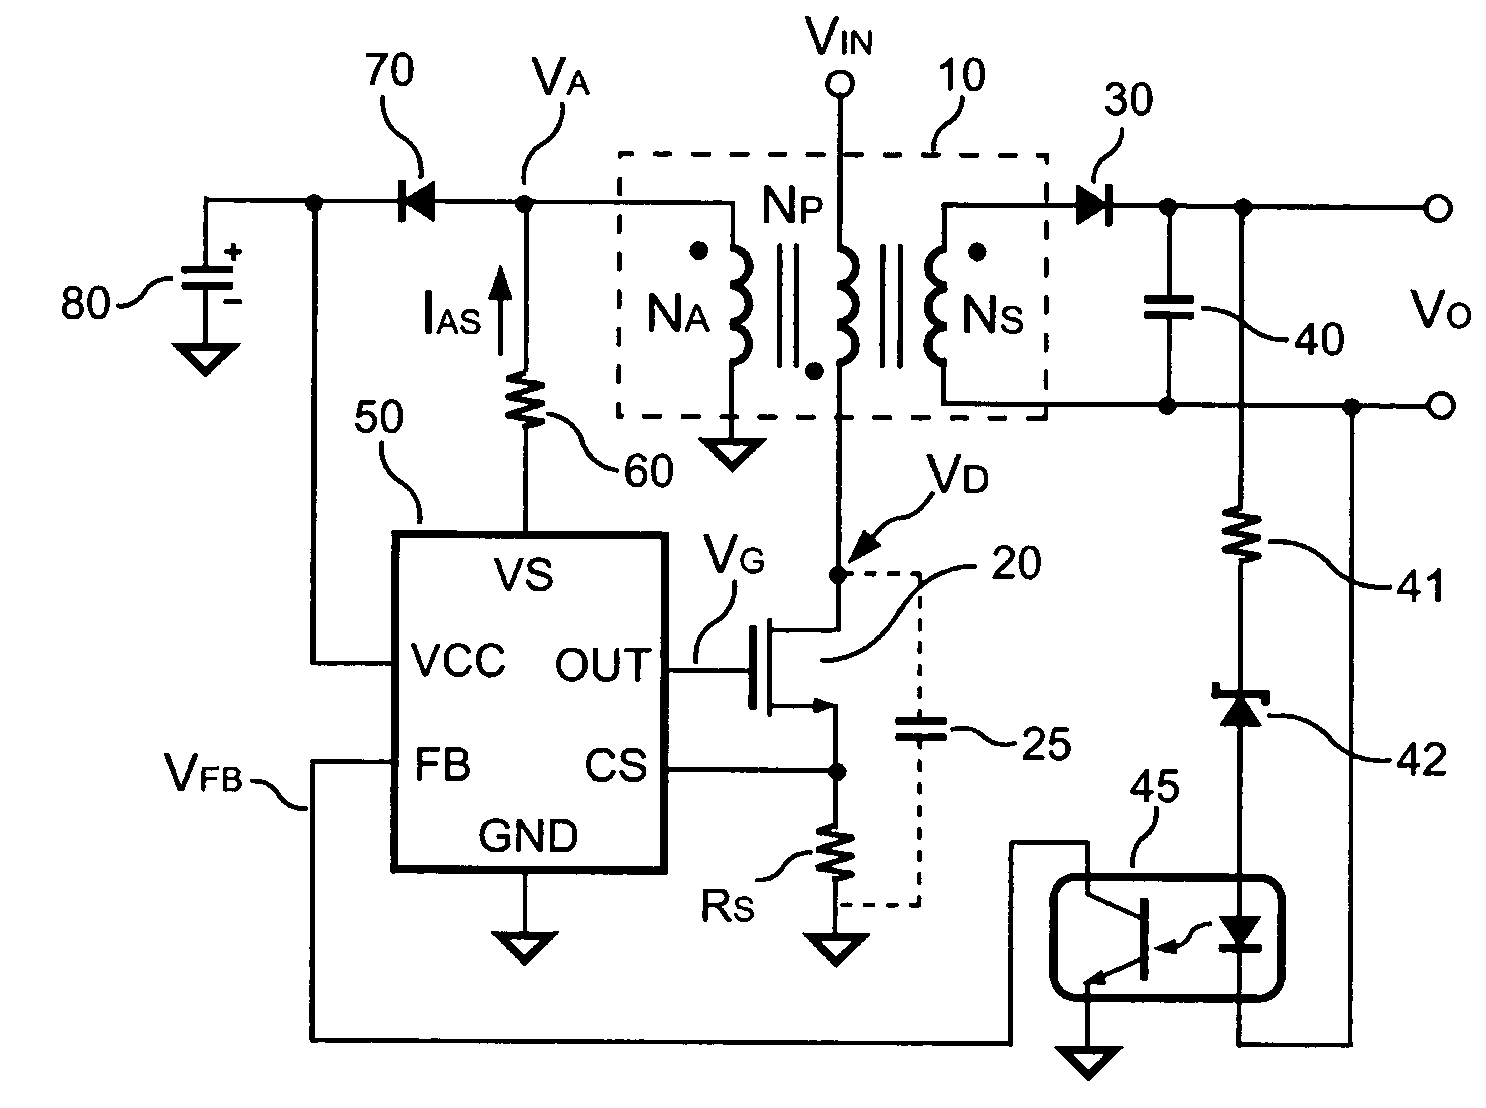 Switching control circuit having a valley voltage detector to achieve soft switching for a resonant power converter